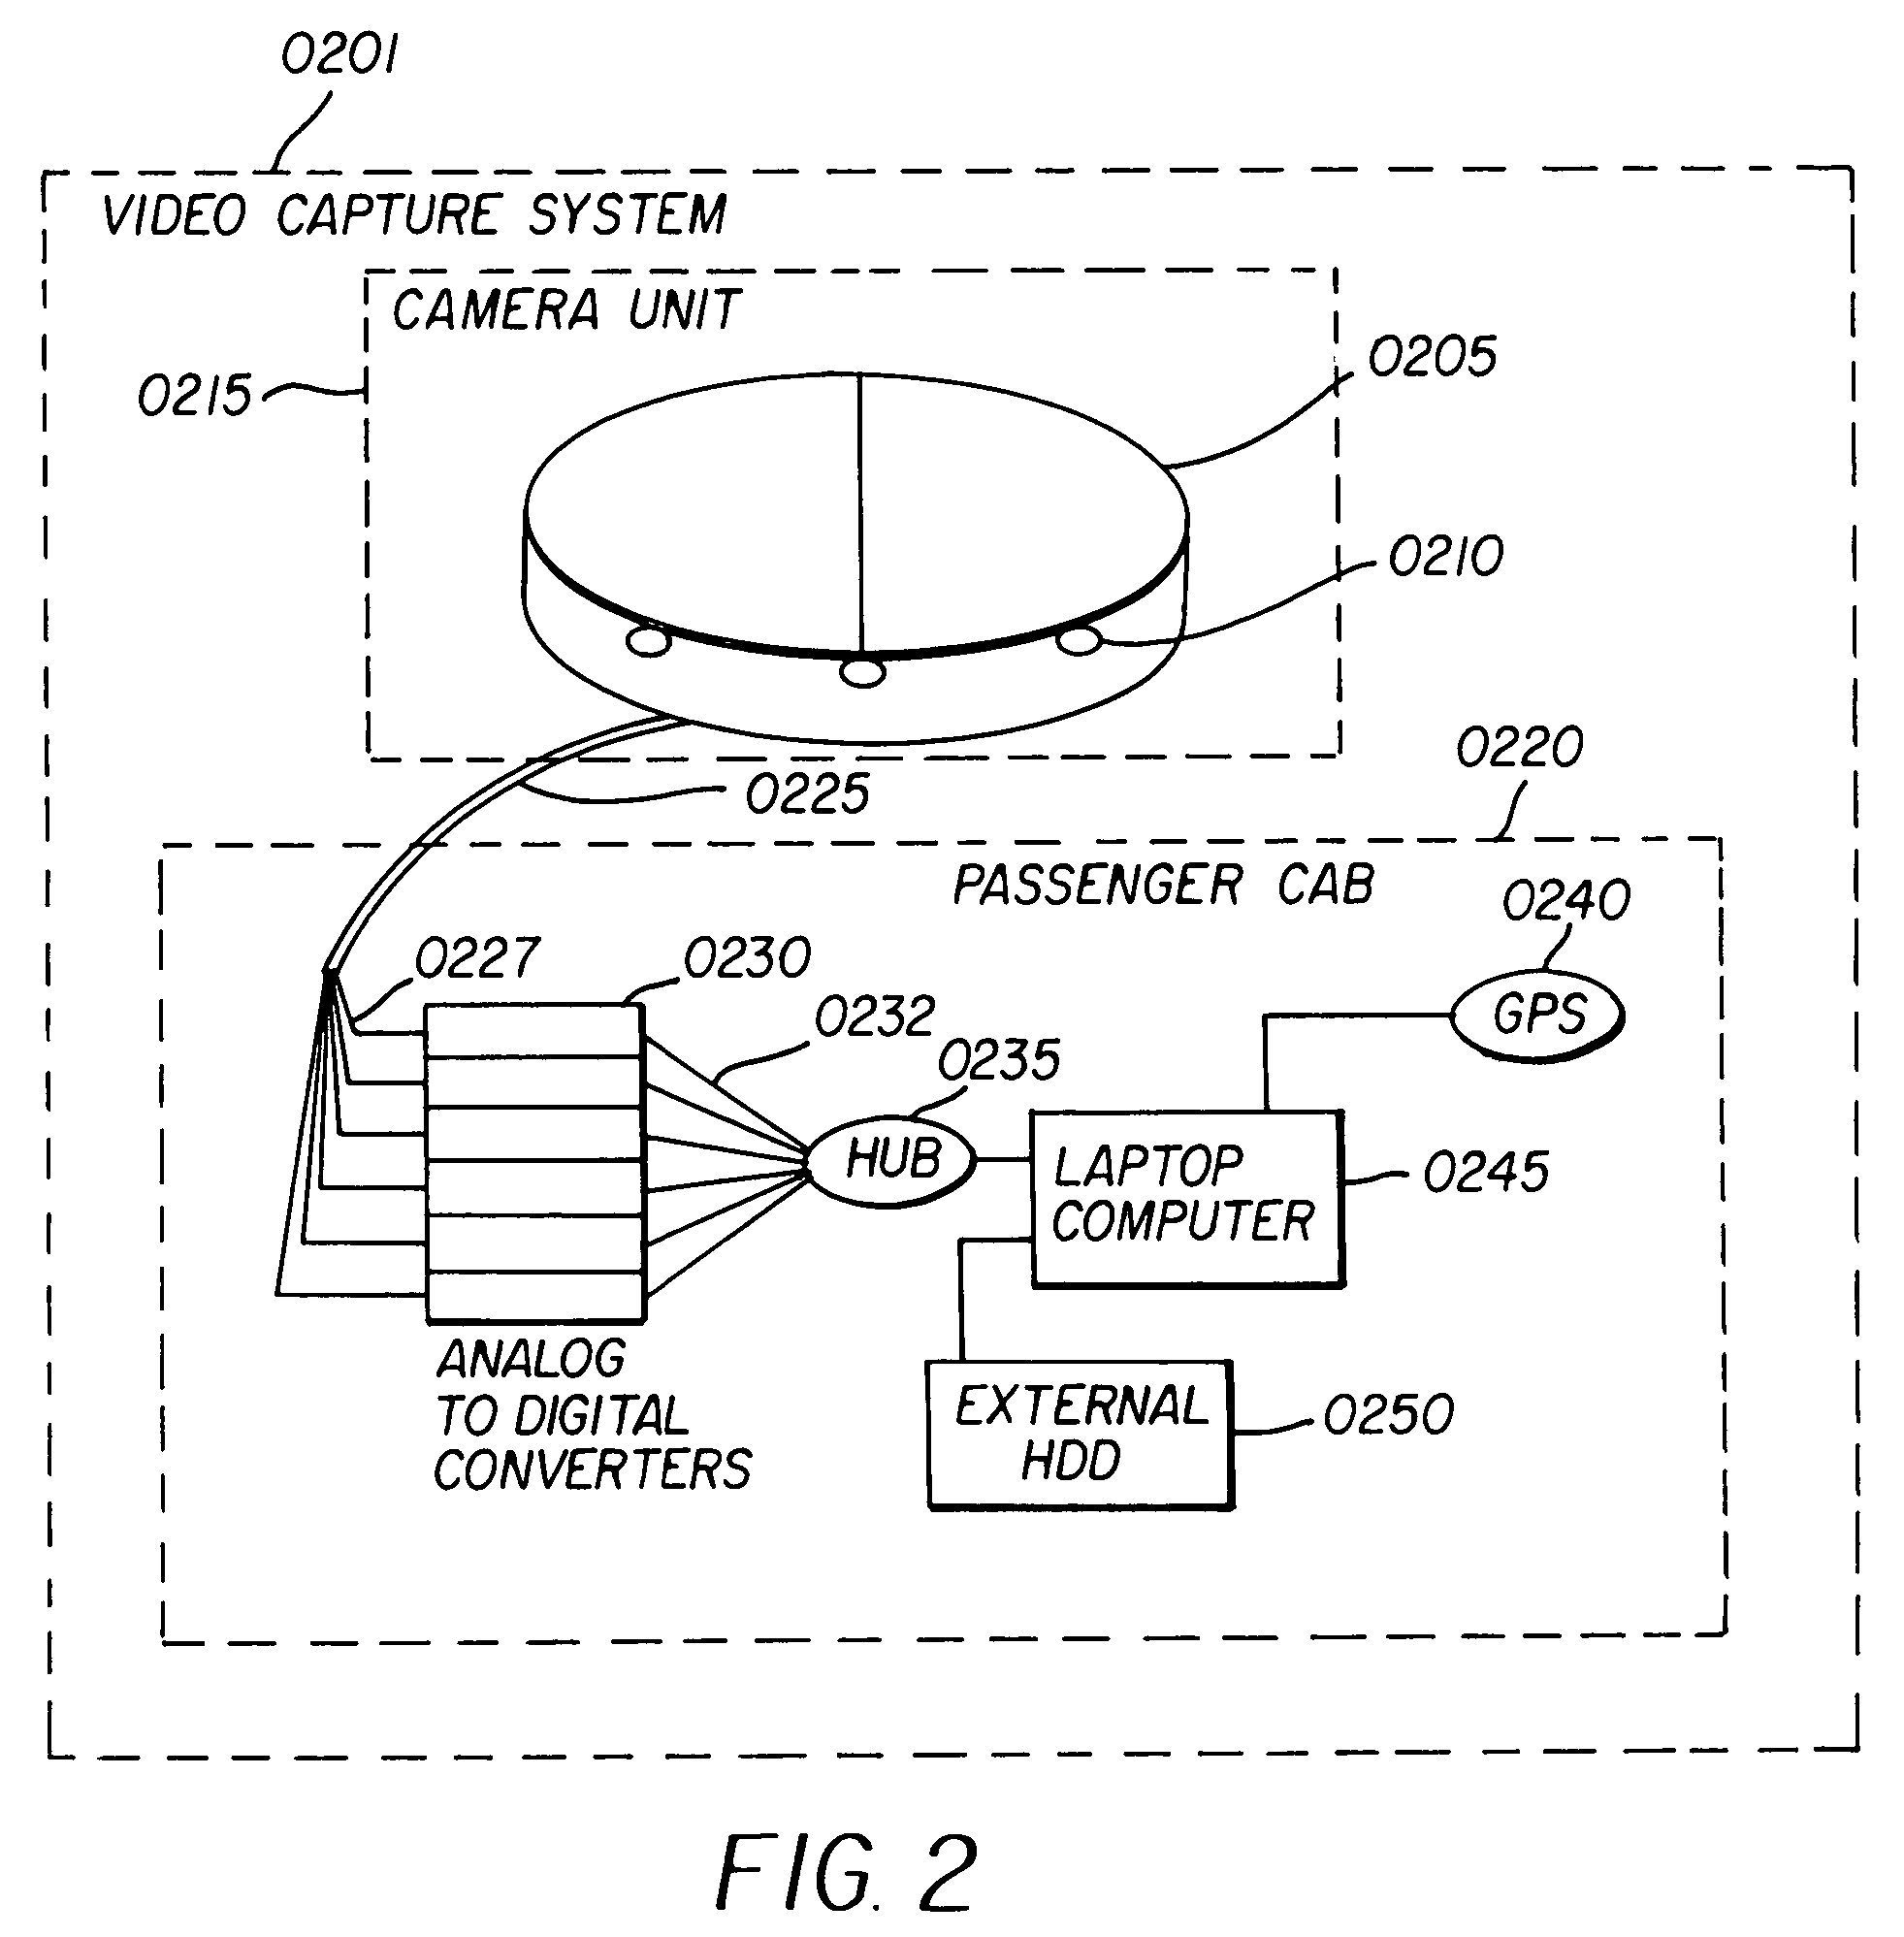 Apparatus and method for producing video drive-by data corresponding to a geographic location